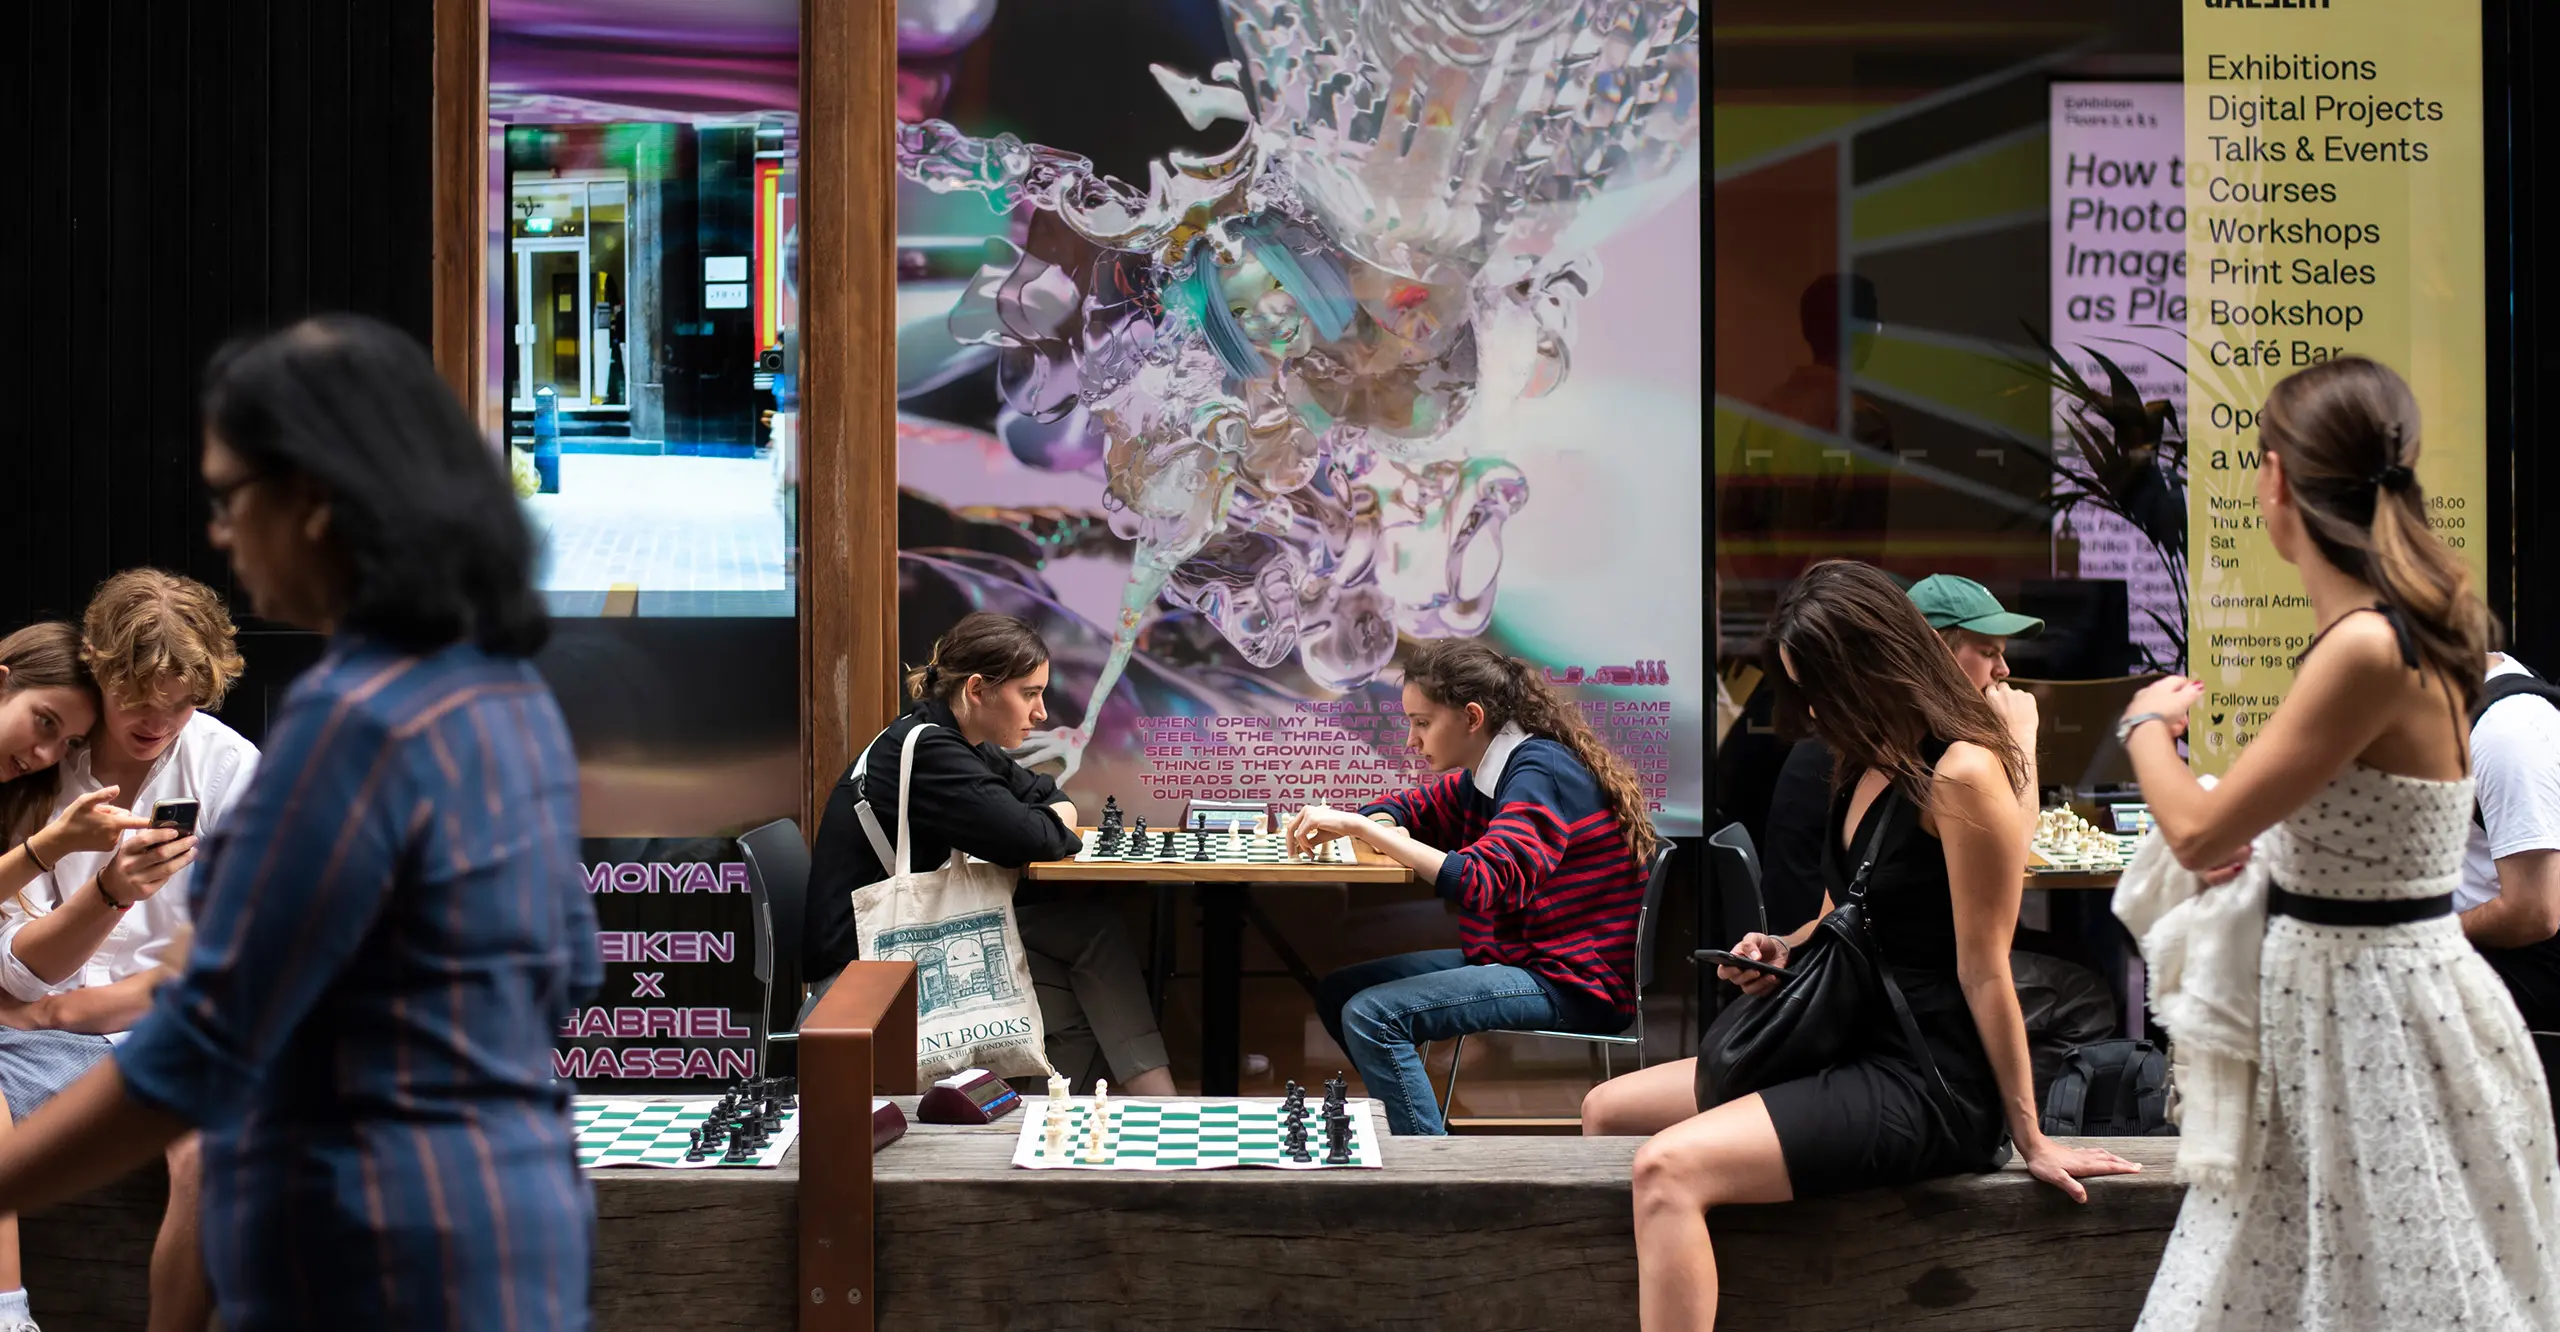 Image of groups of players enjoying games of chess at The Photographers Gallery